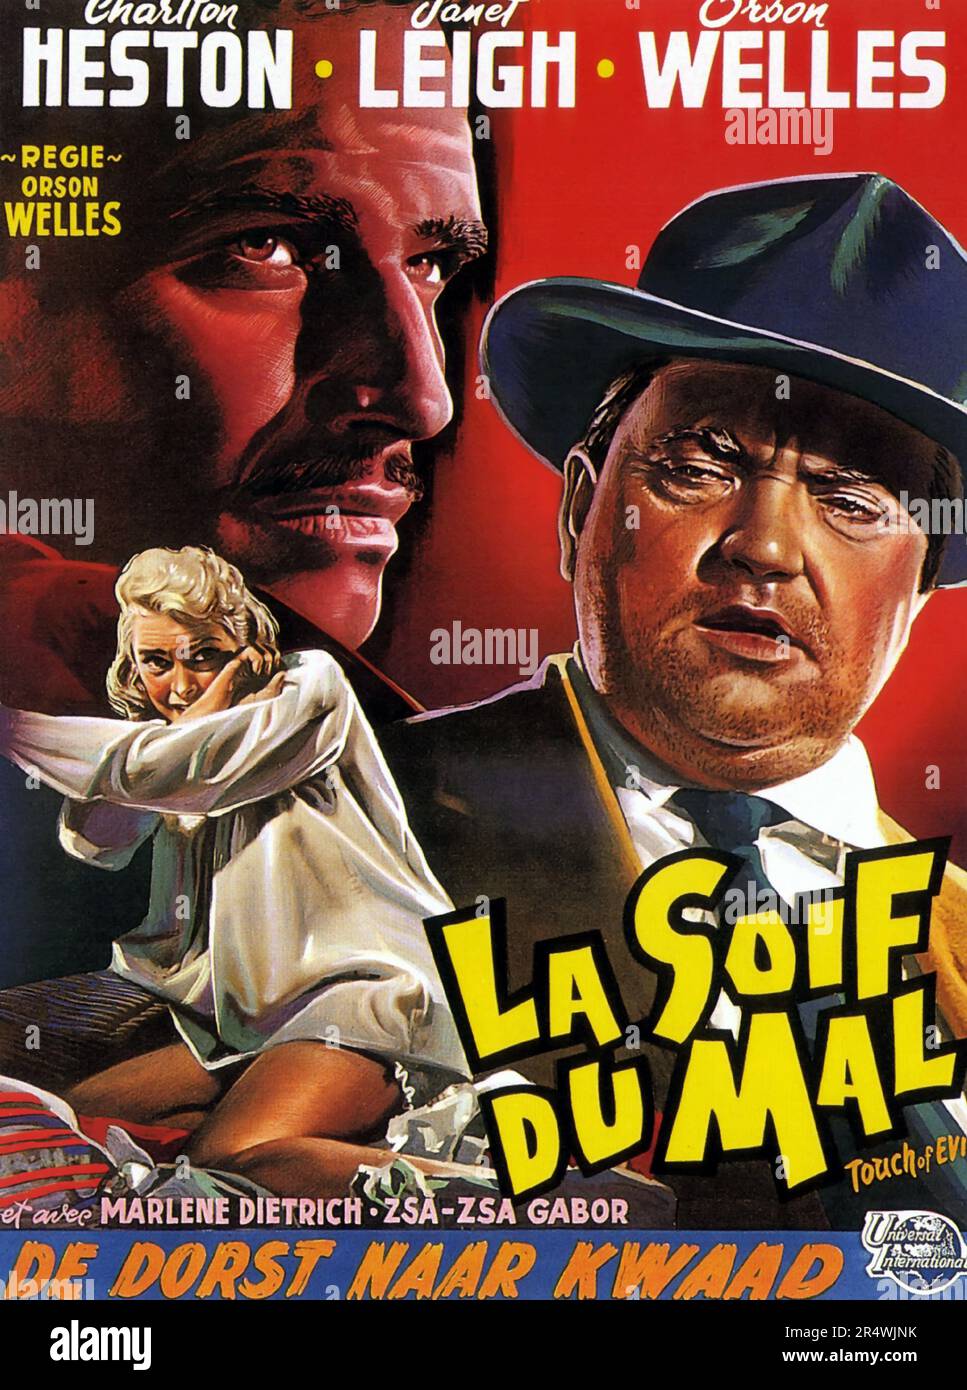 Touch of Evil is a 1958 American crime thriller film, written, directed by, and co-starring Orson Welles. The screenplay was loosely based on the novel Badge of Evil by Whit Masterson. Also starring Charlton Heston, Janet Leigh and Marlene Dietrich. Stock Photo